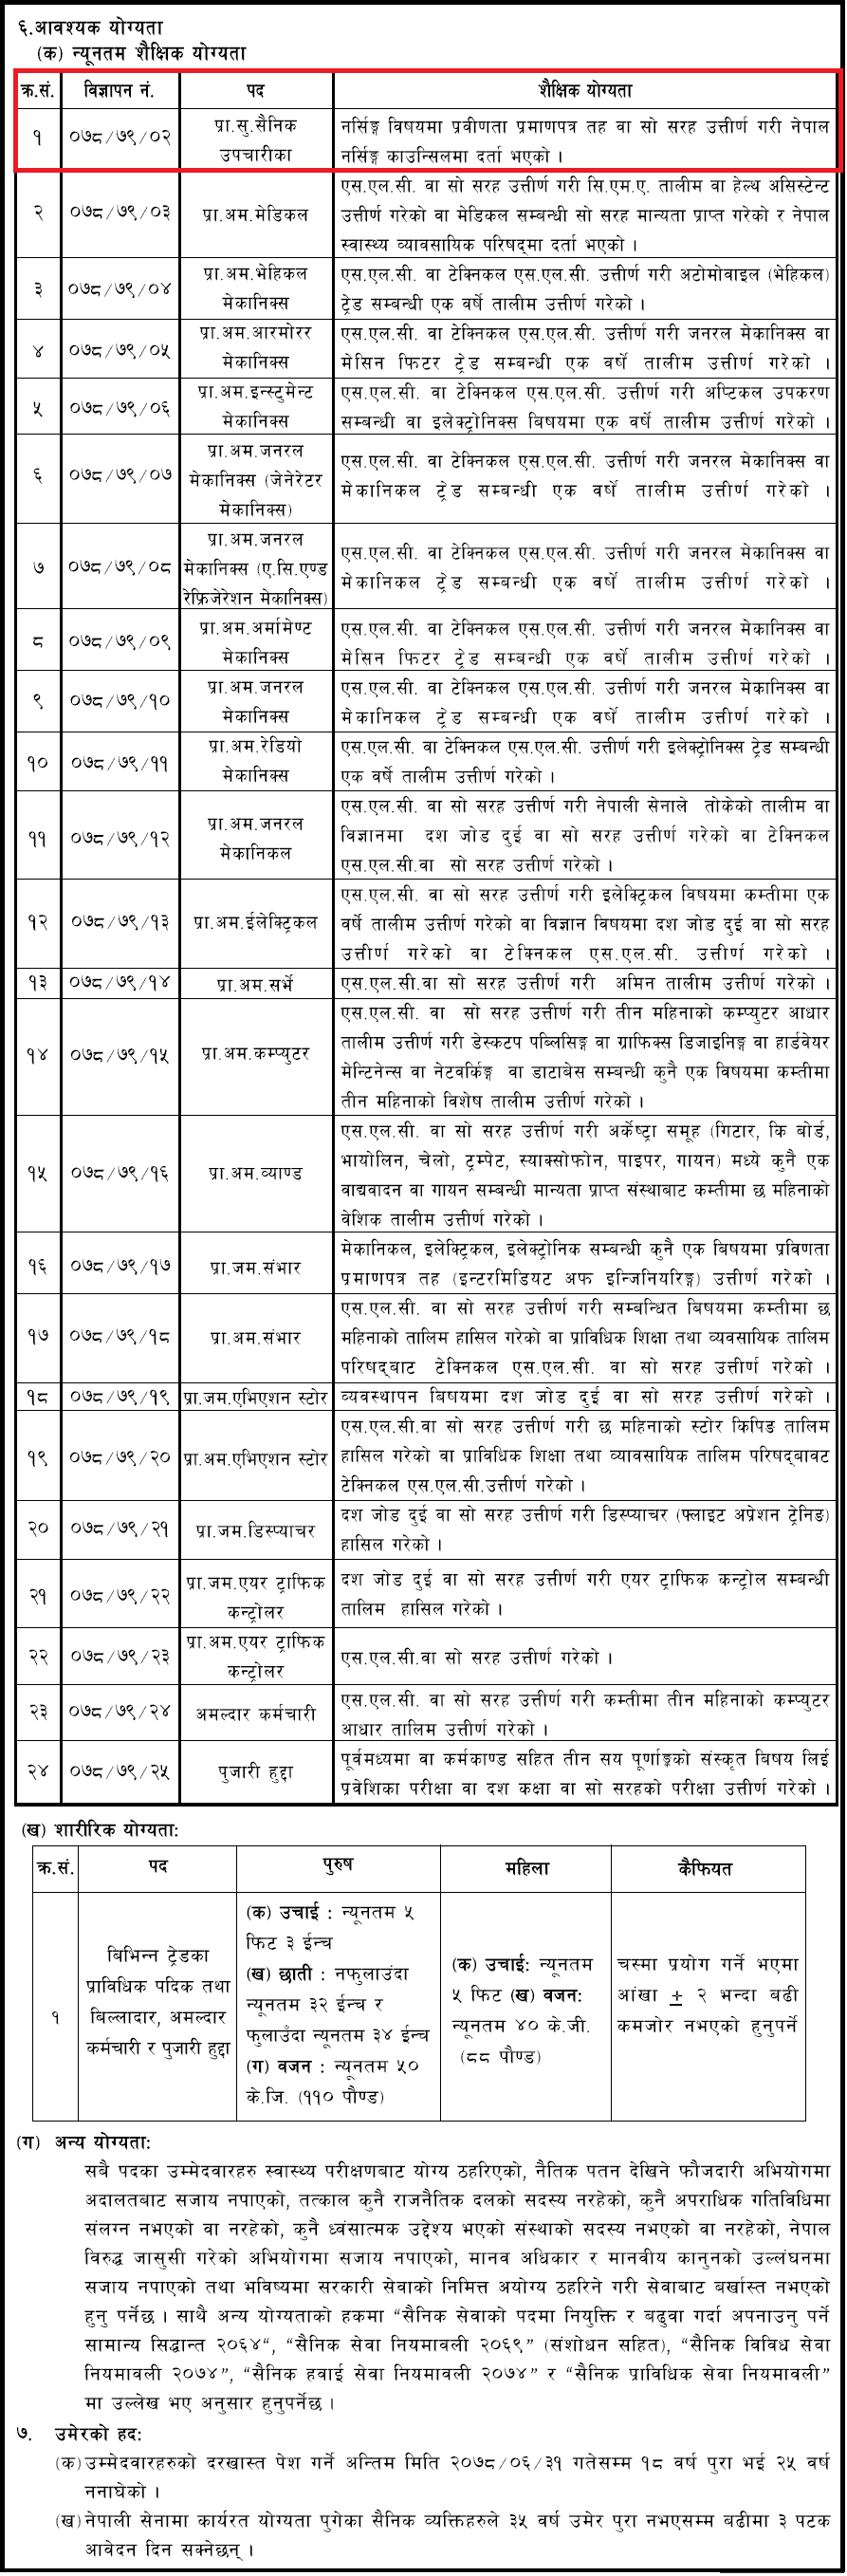 Vacancy Announcement for Staff Nurse Nepal Army 